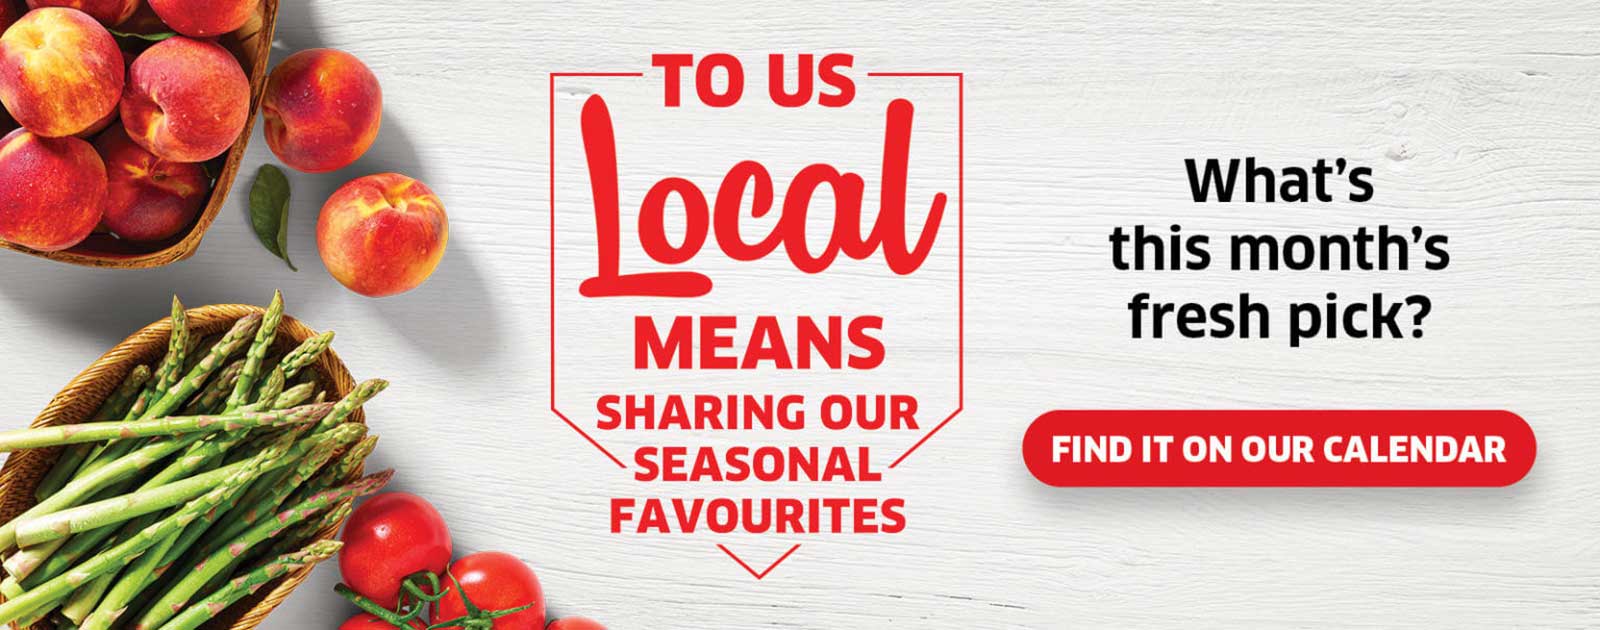 Text Reading 'To us local means sharing our seasonal favourites. Find out this months' fresh pick from the 'Calendar' button given below. Along with the picture of some fresh fruits on the left side.